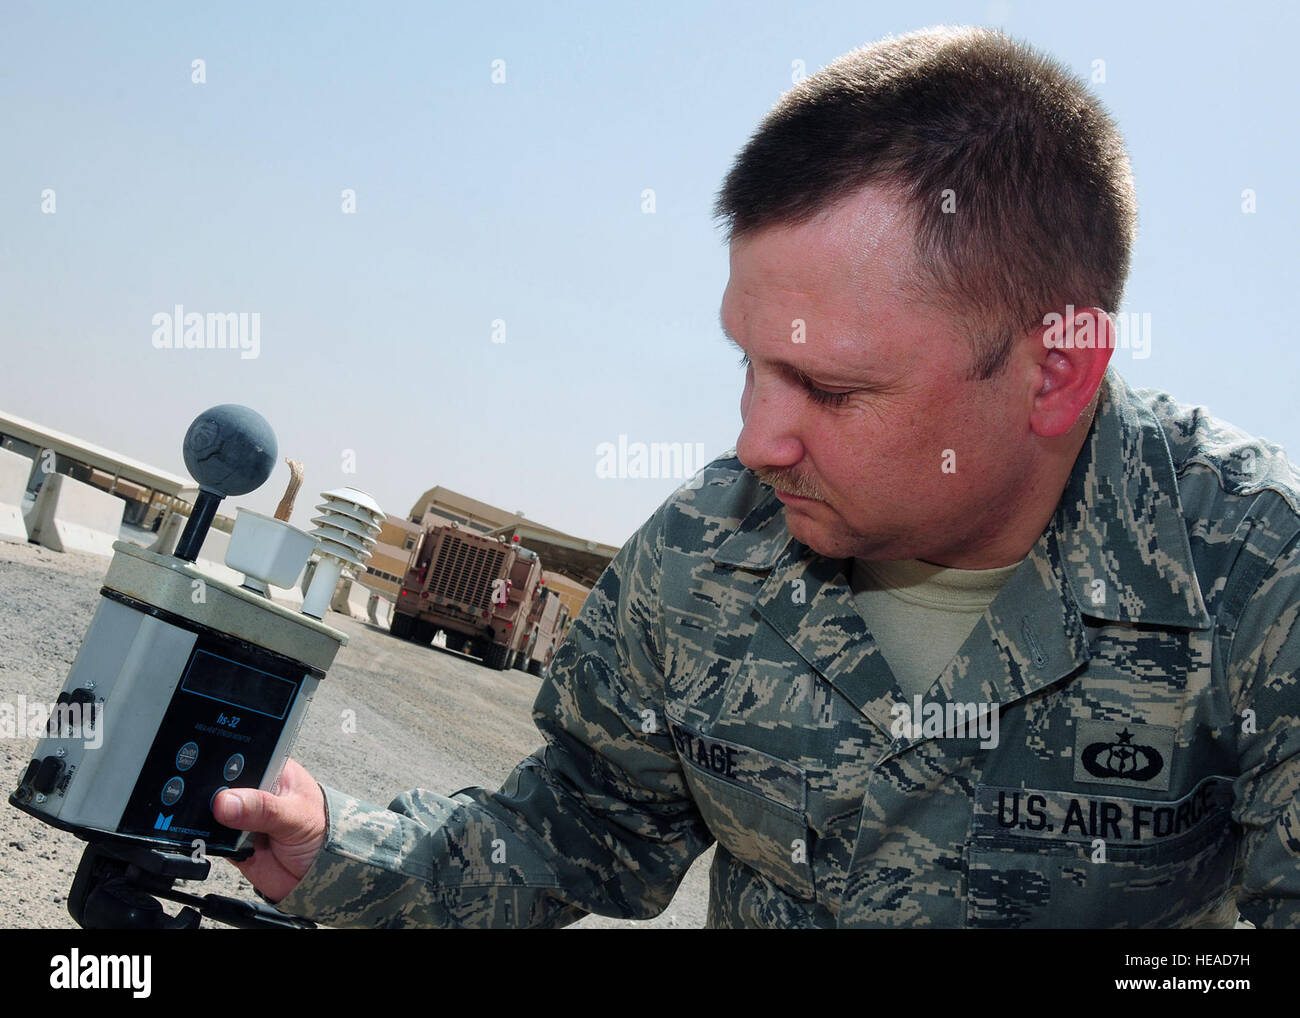 SOUTHWEST ASIA -- Tech. Sgt. Richard Stage, 386th Expeditionary Operations Support Squadron weather forecaster, checks the wet bulb globe temperature reading on a hs-32 area heat stress monitor at an undisclosed location in Southwest Asia Sept. 15, 2009.  Sergeant Stage is deployed from the 62nd Airlift Wing, McChord Air Force Base, Wash., and hails from Elmira, N.Y.  Tech. Sgt. Tony Tolley) Stock Photo